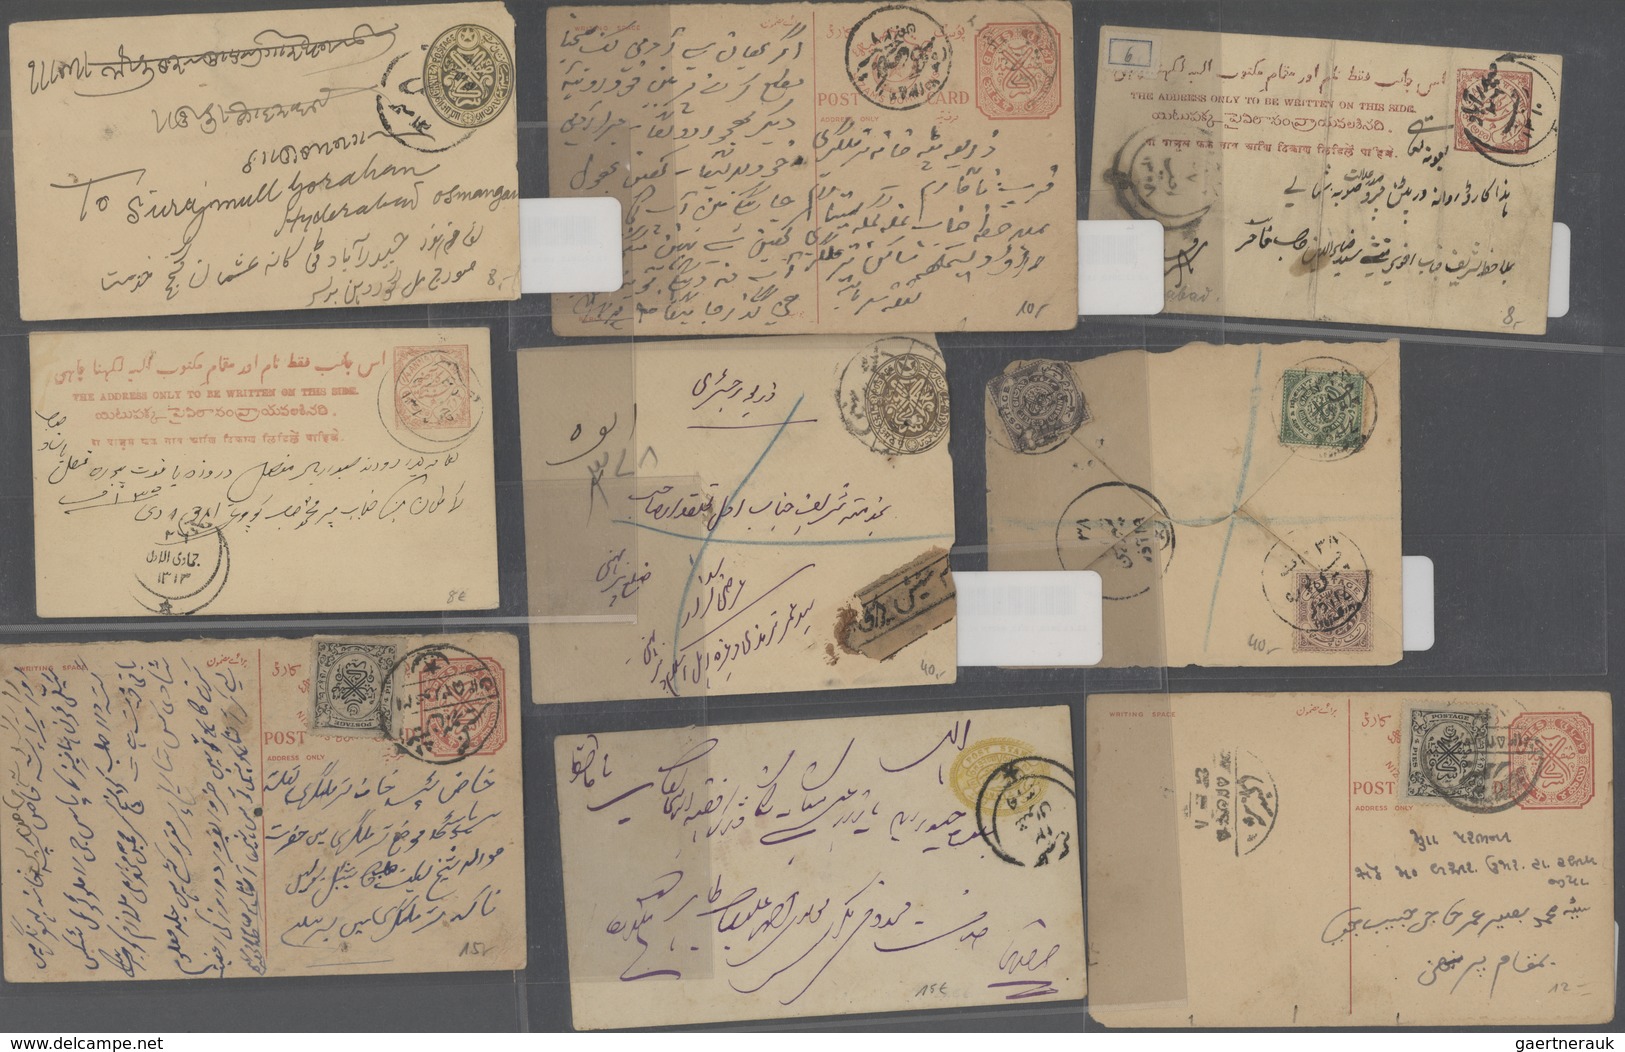 Indien - Feudalstaaten: 1860's-1940's ca.: Collection of 95 covers, postcards and postal stationery